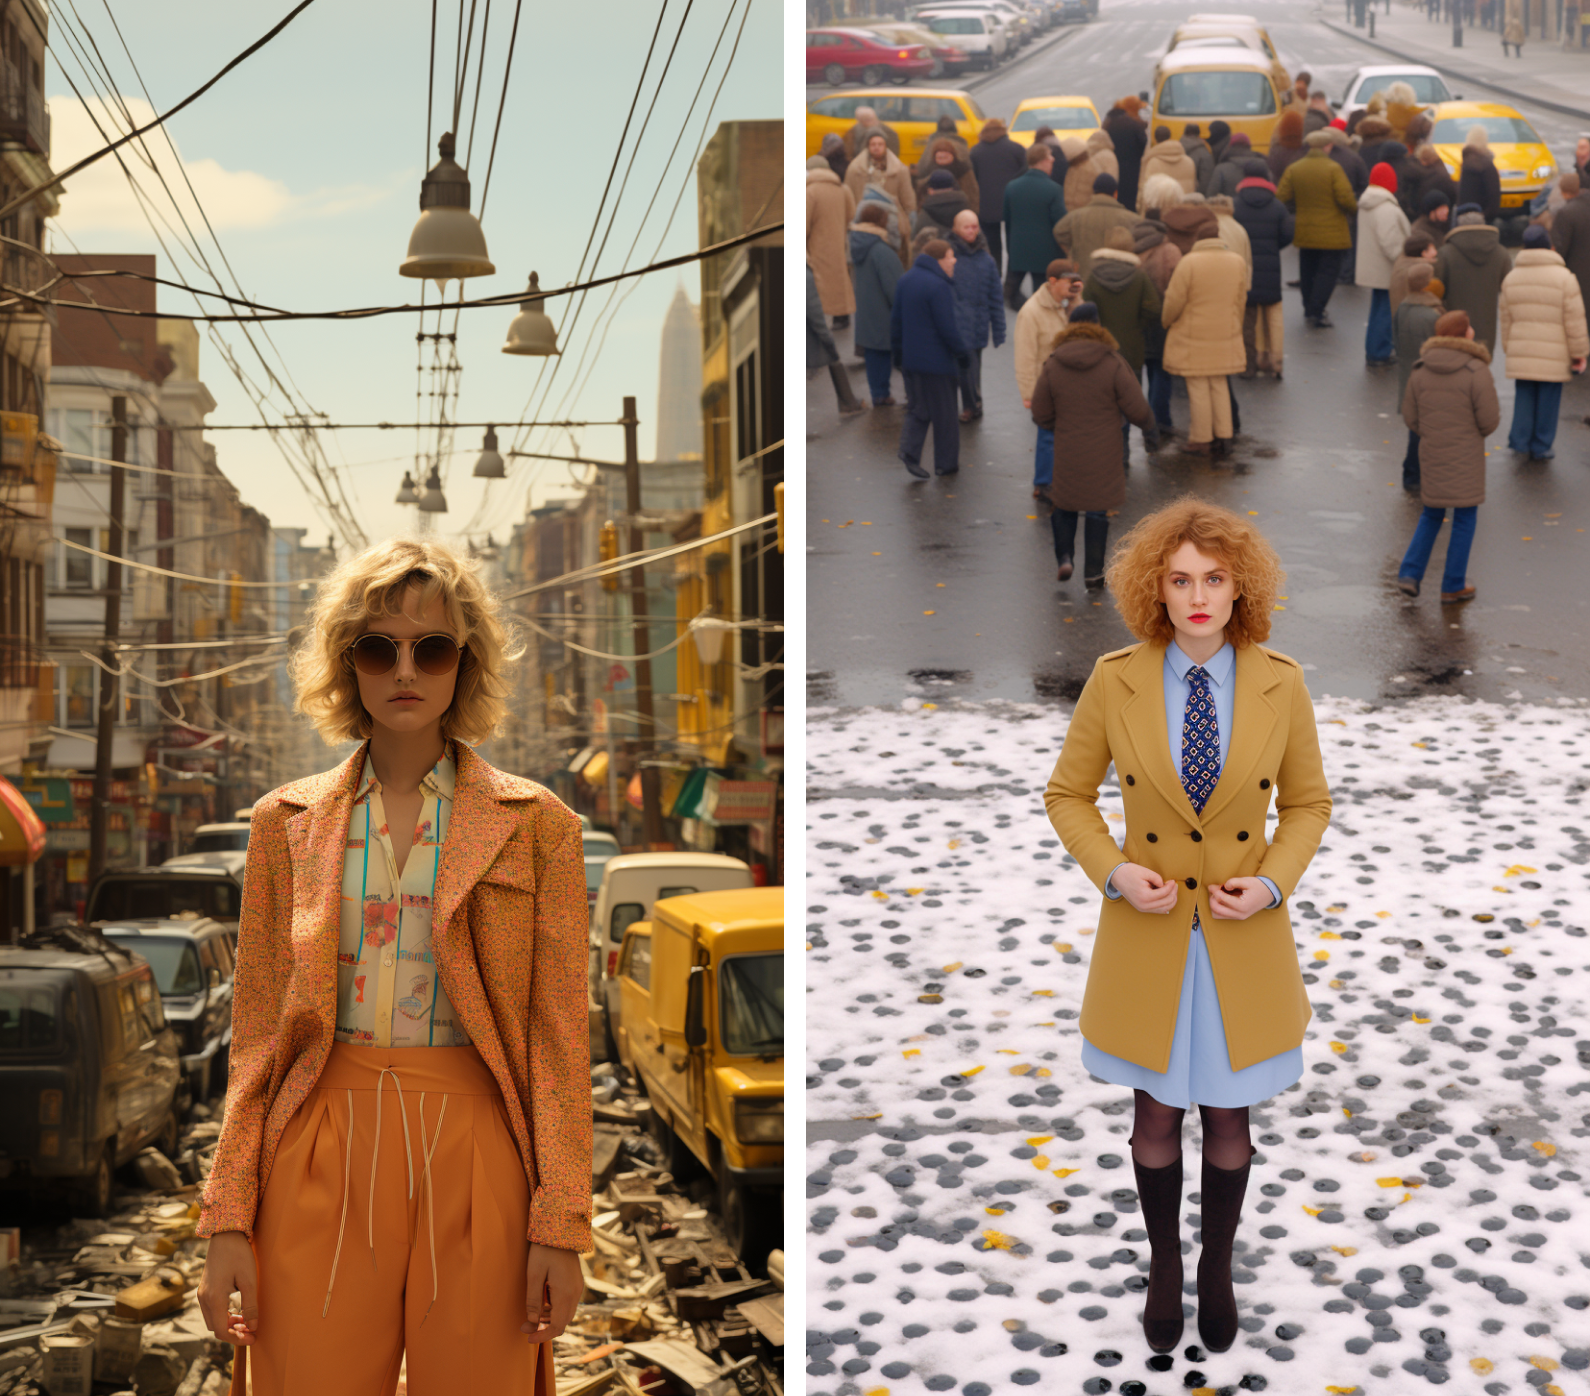 Women, surrounded by a hectic urban environment, wearing retro clothes